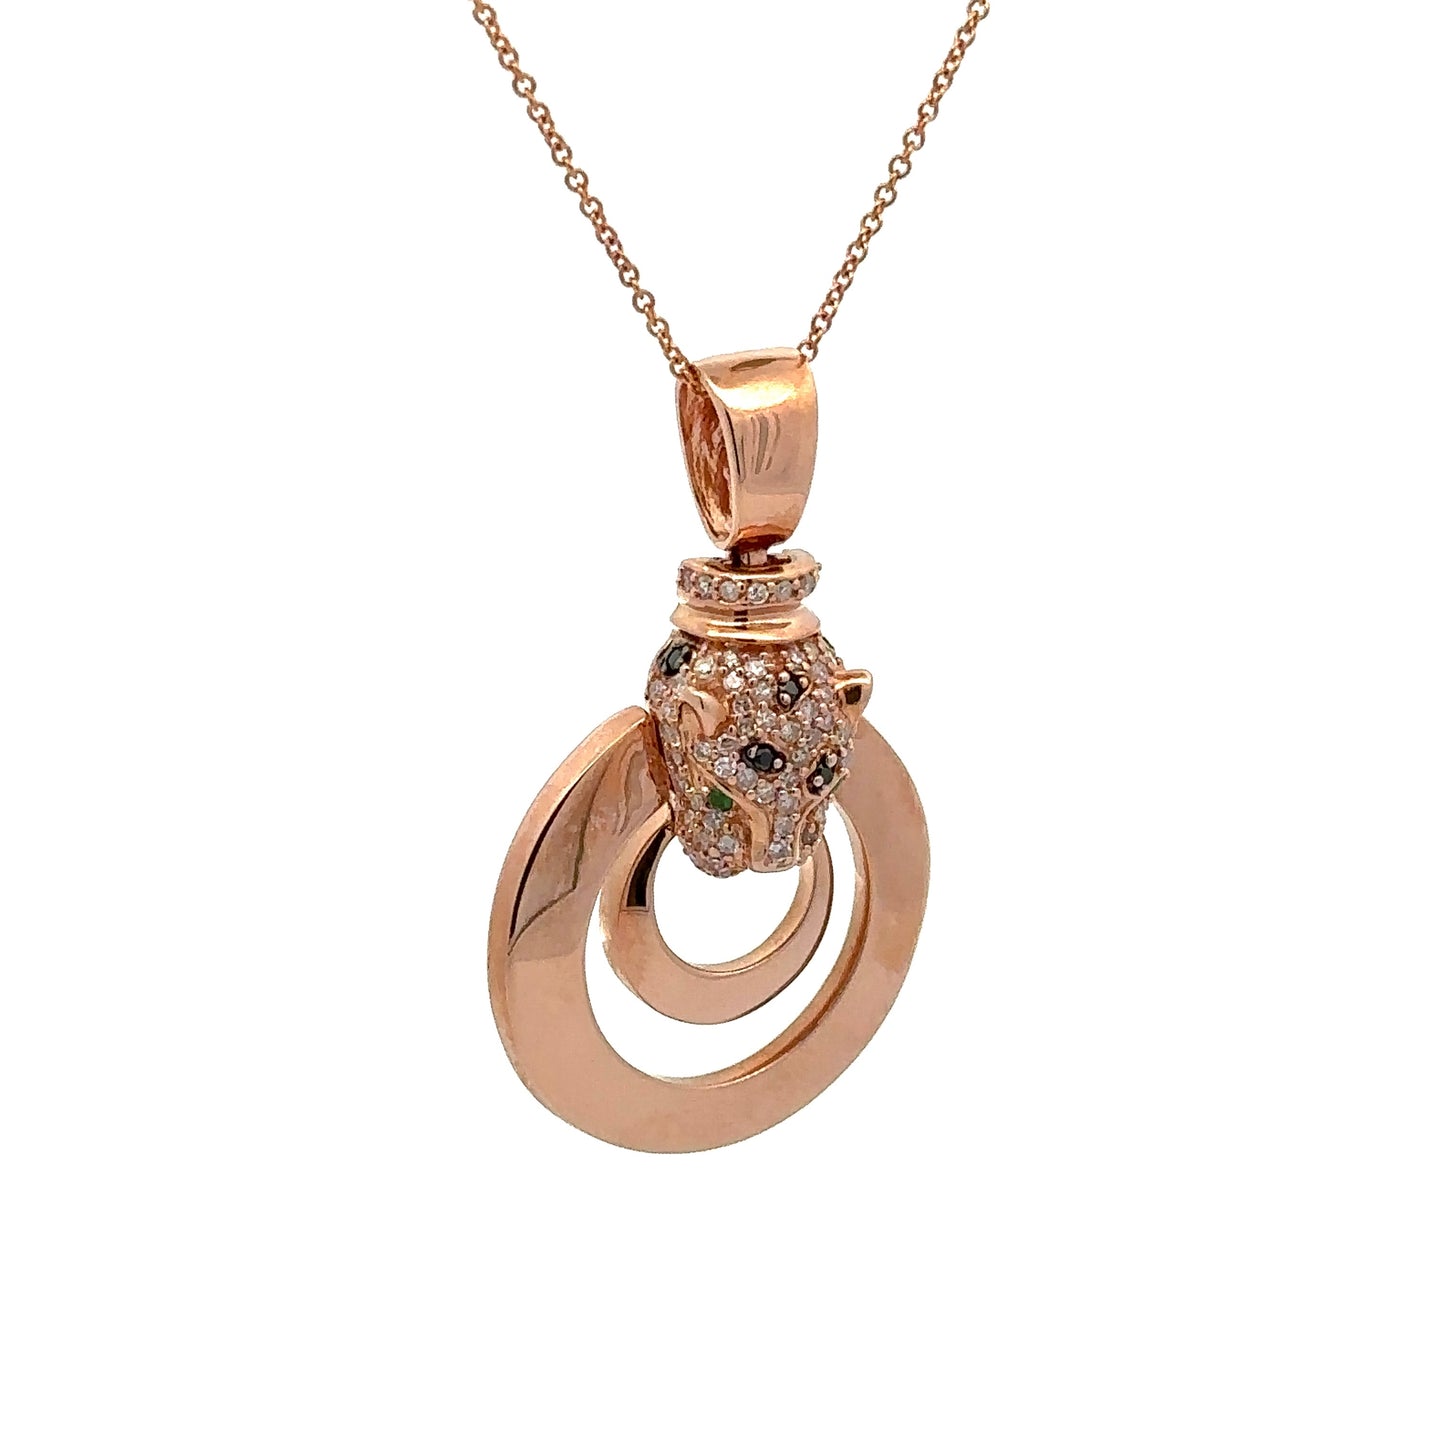 Diagonal view of rose gold pendant with diamond panther head